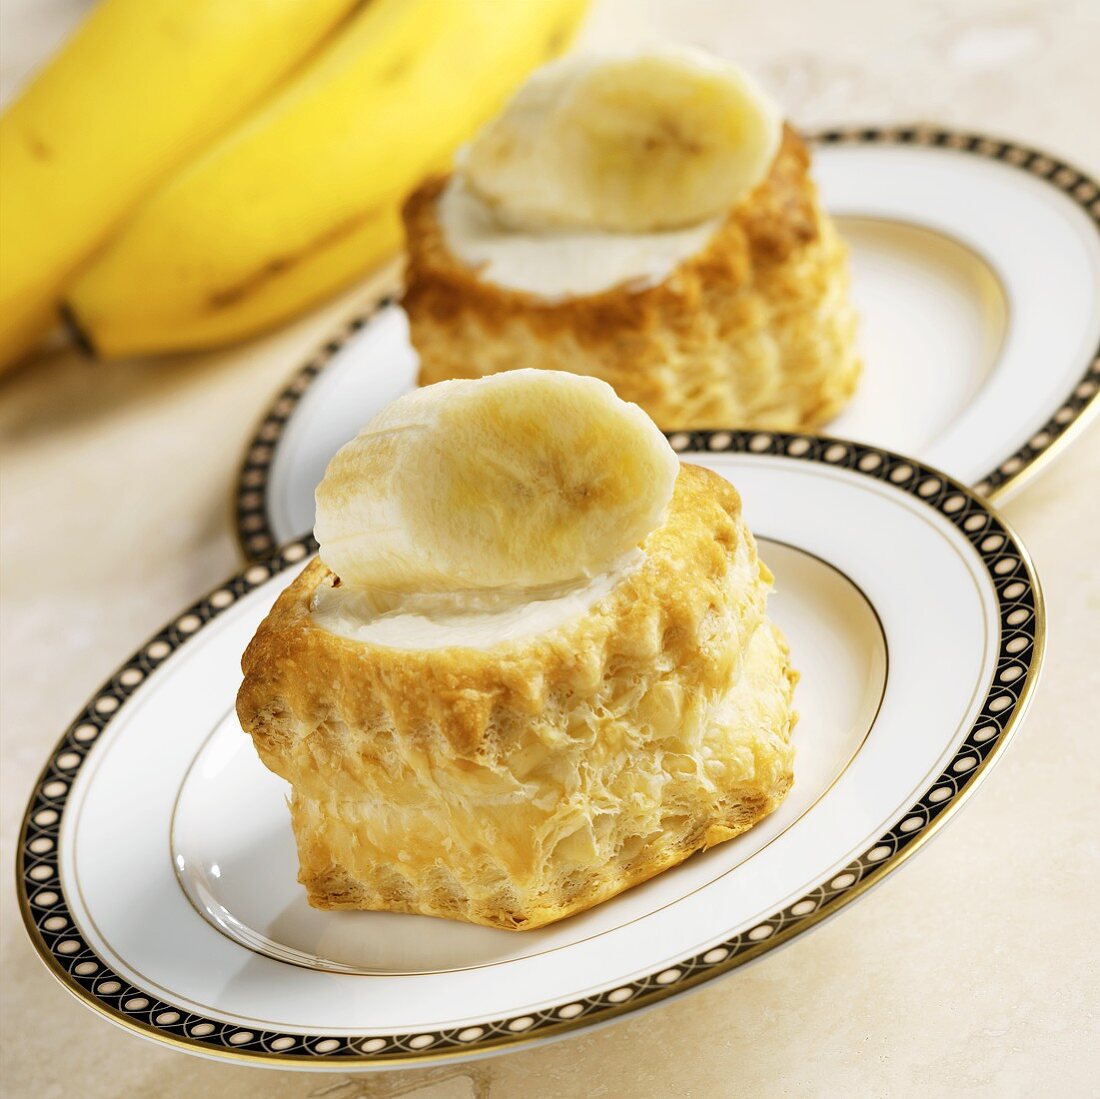 Puff Pastry Filled with Coffee Cream Cheese and Topped with Banana